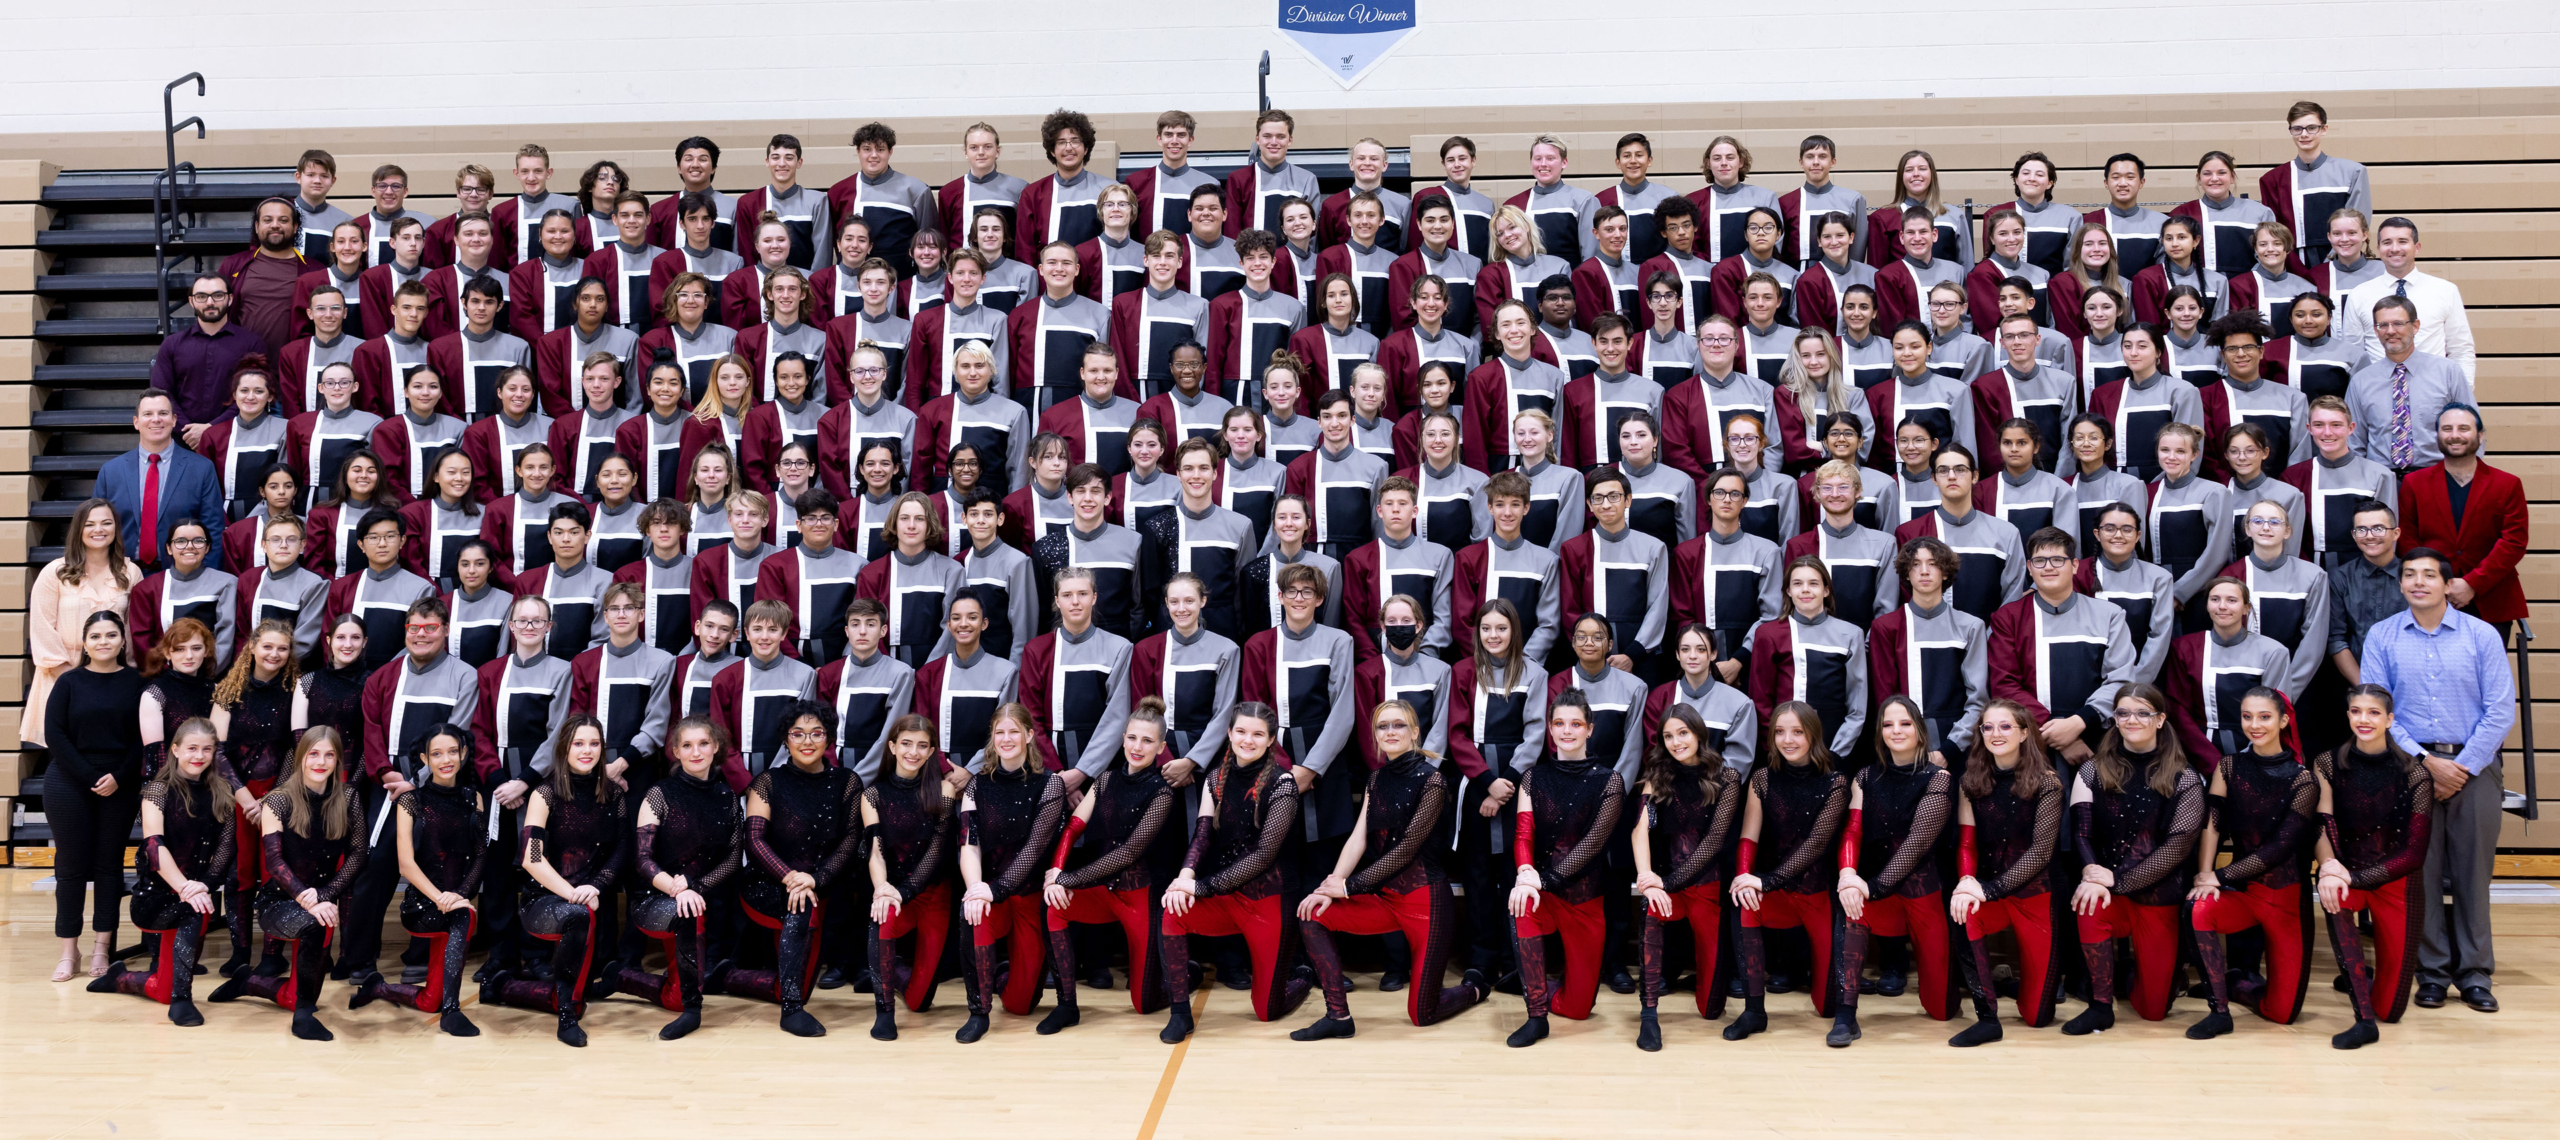 Pride of the West Marching Band 2021/22 school year